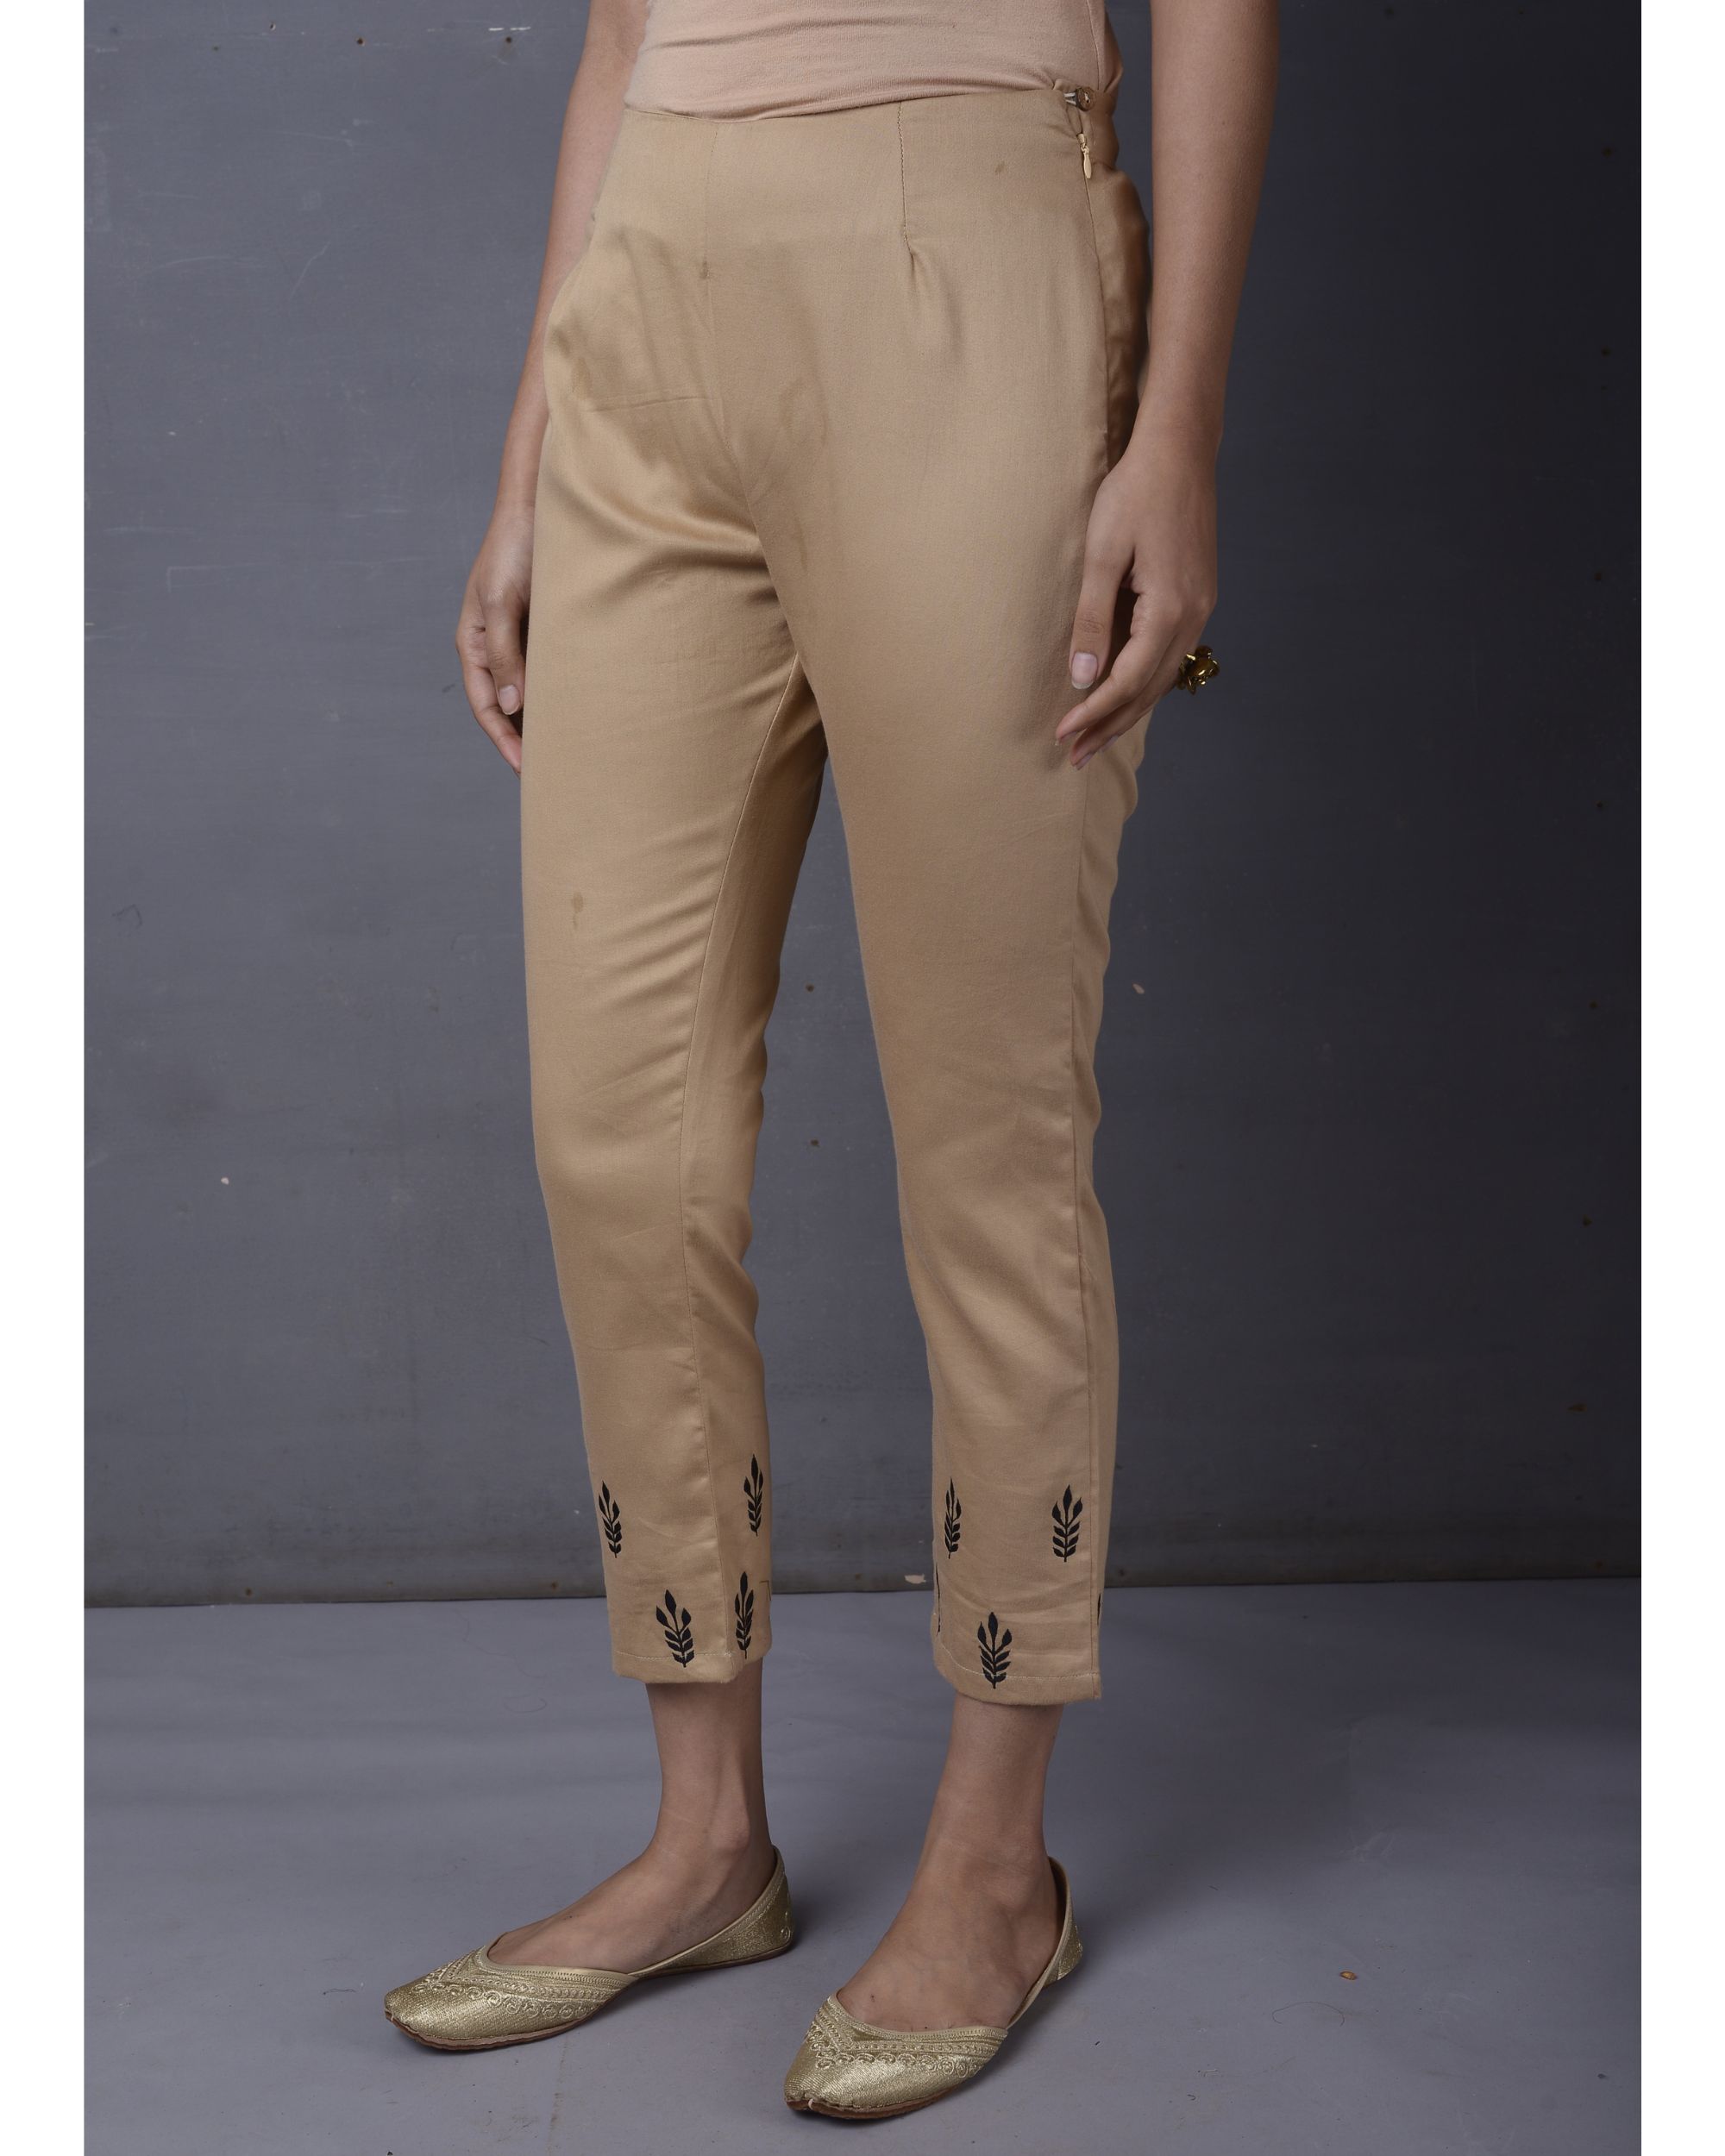 Beige embroidered pant by Pinksky  The Secret Label